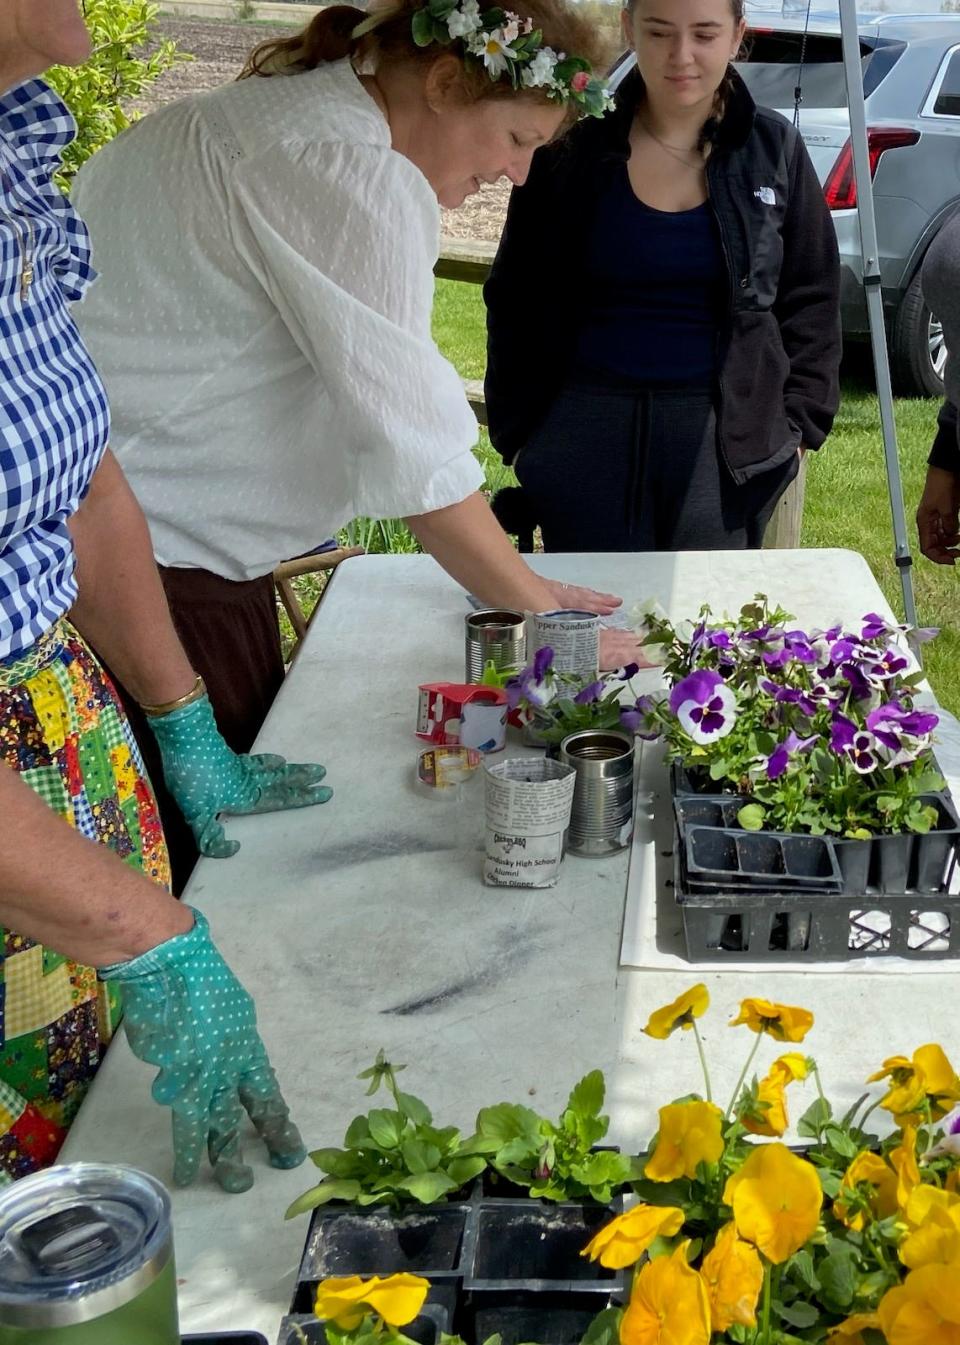 Come on out to Harvey One-Room School on Sunday and "pot a pansy" with Paula Brown. The welcome spring event, Bees, Birds and Butterflies, is from 1-4 p.m.